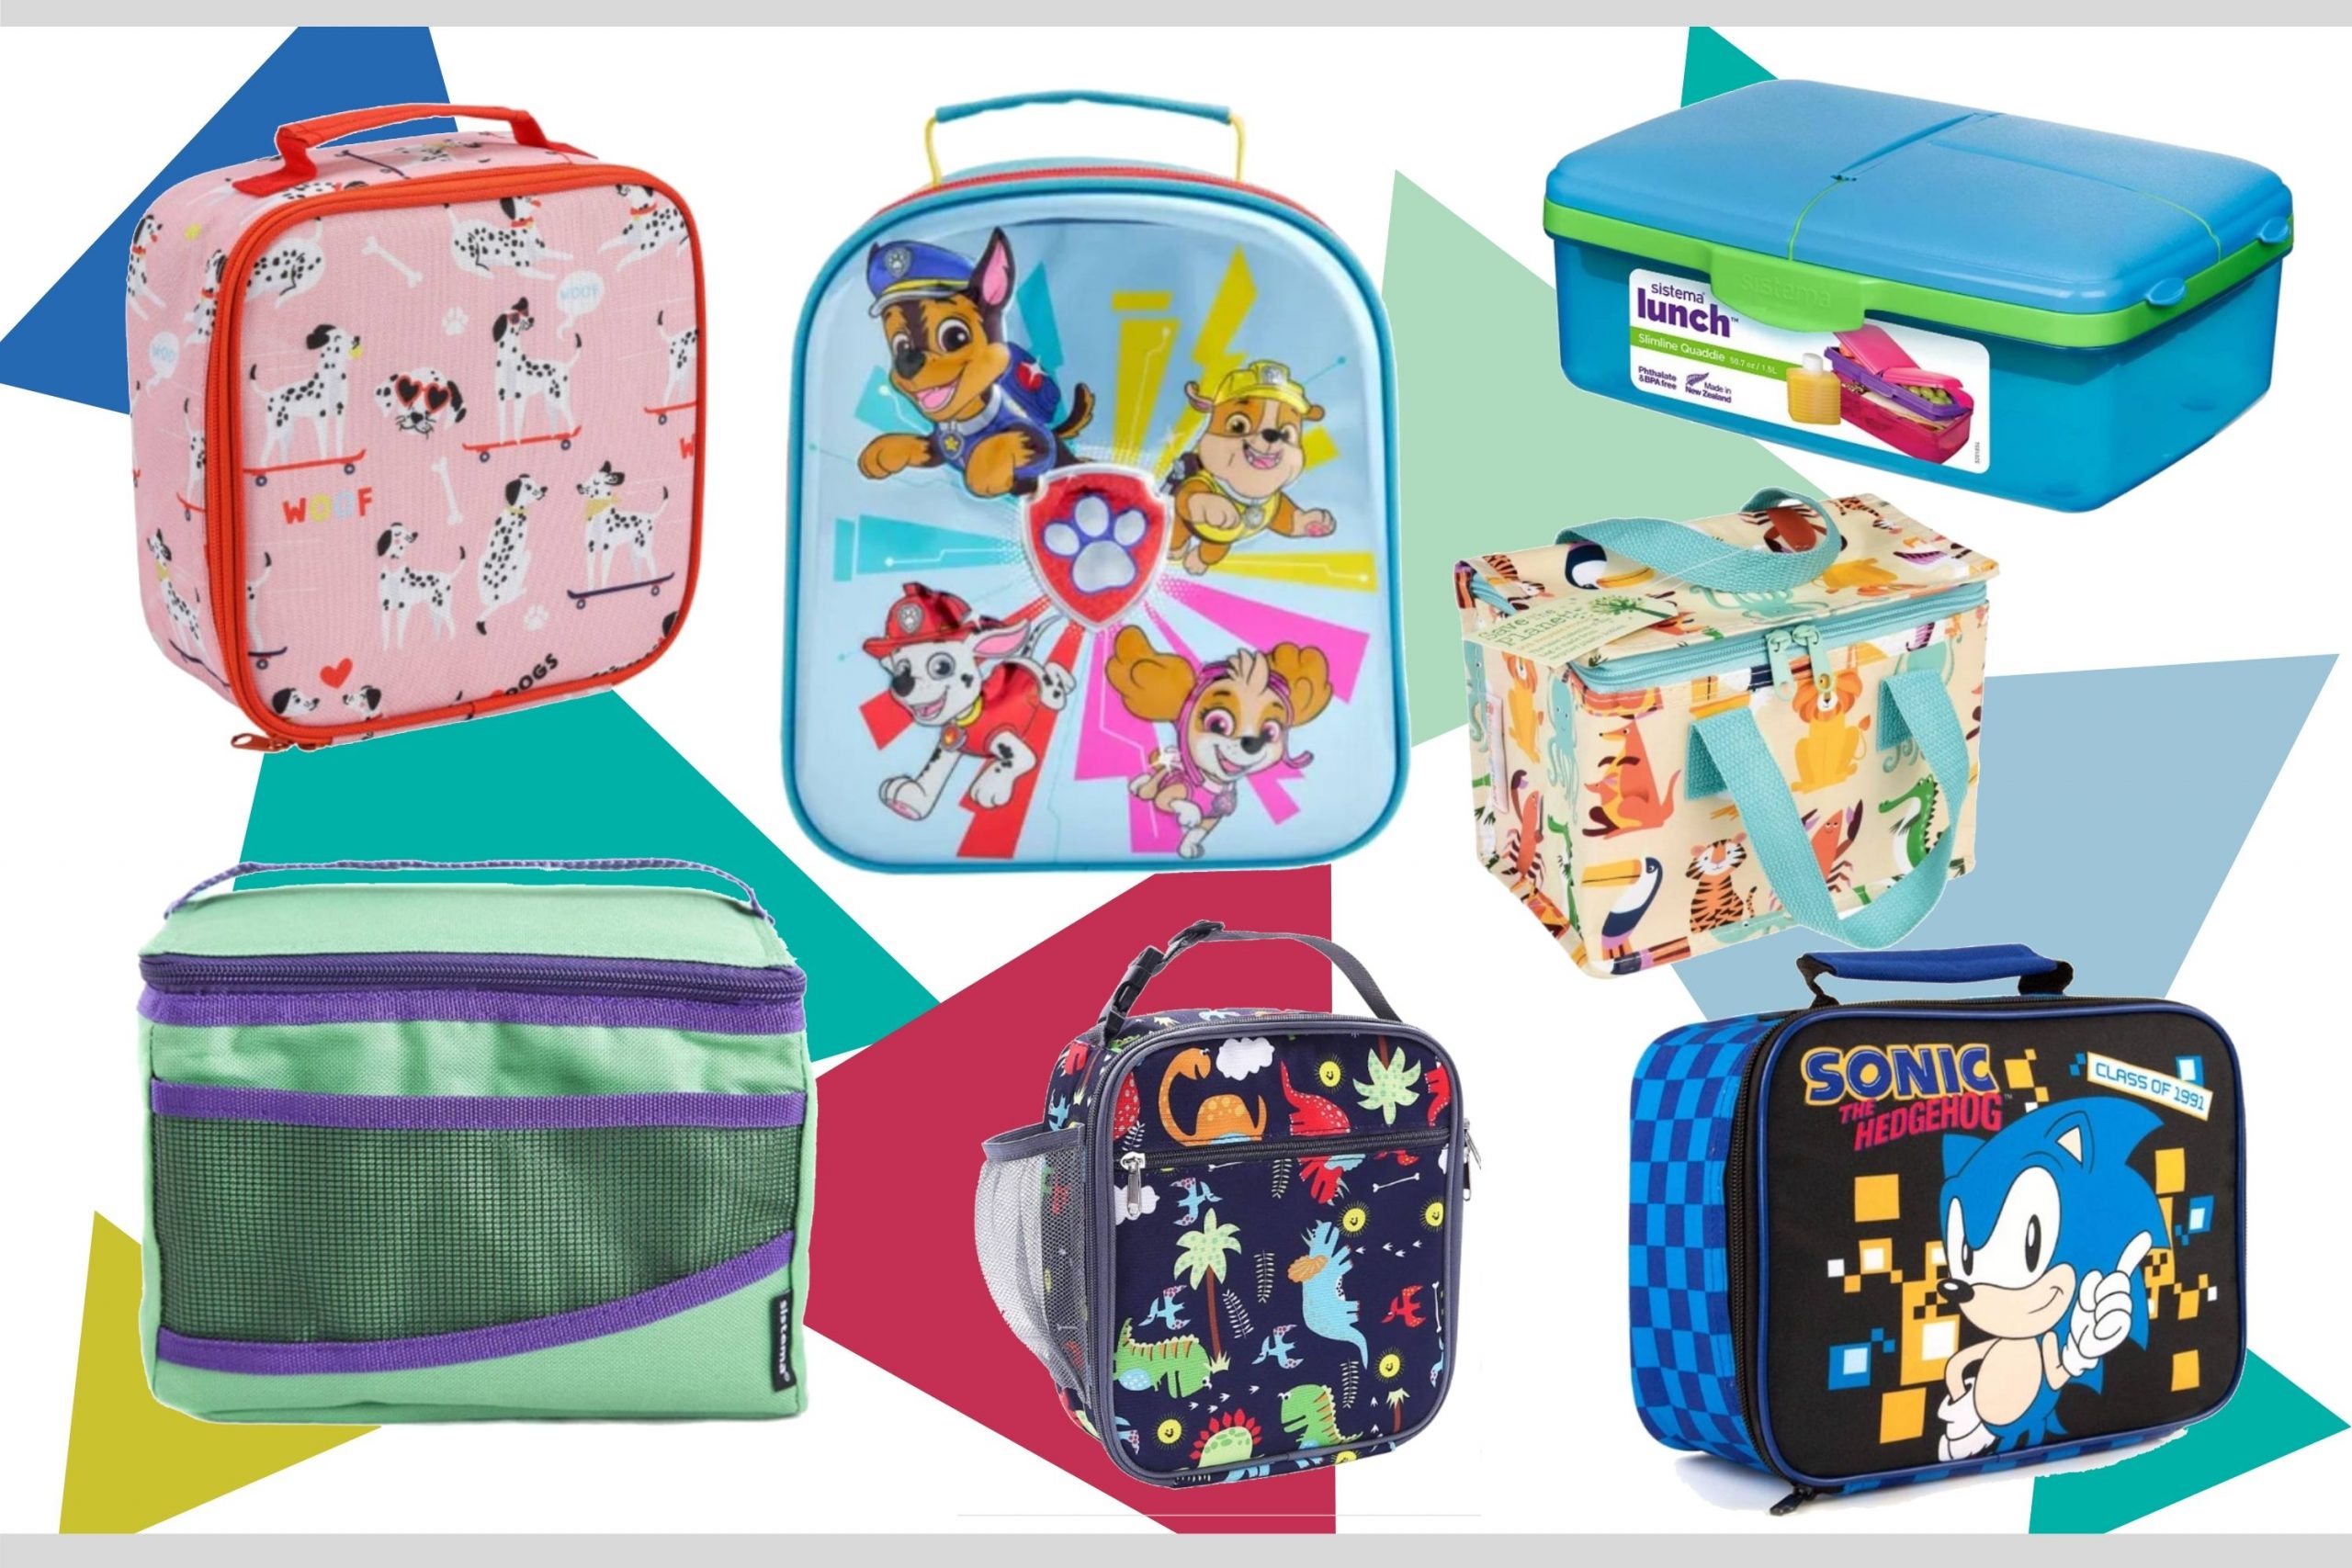 Best lunch boxes 2022: 13 kids lunch bags and boxes under £15